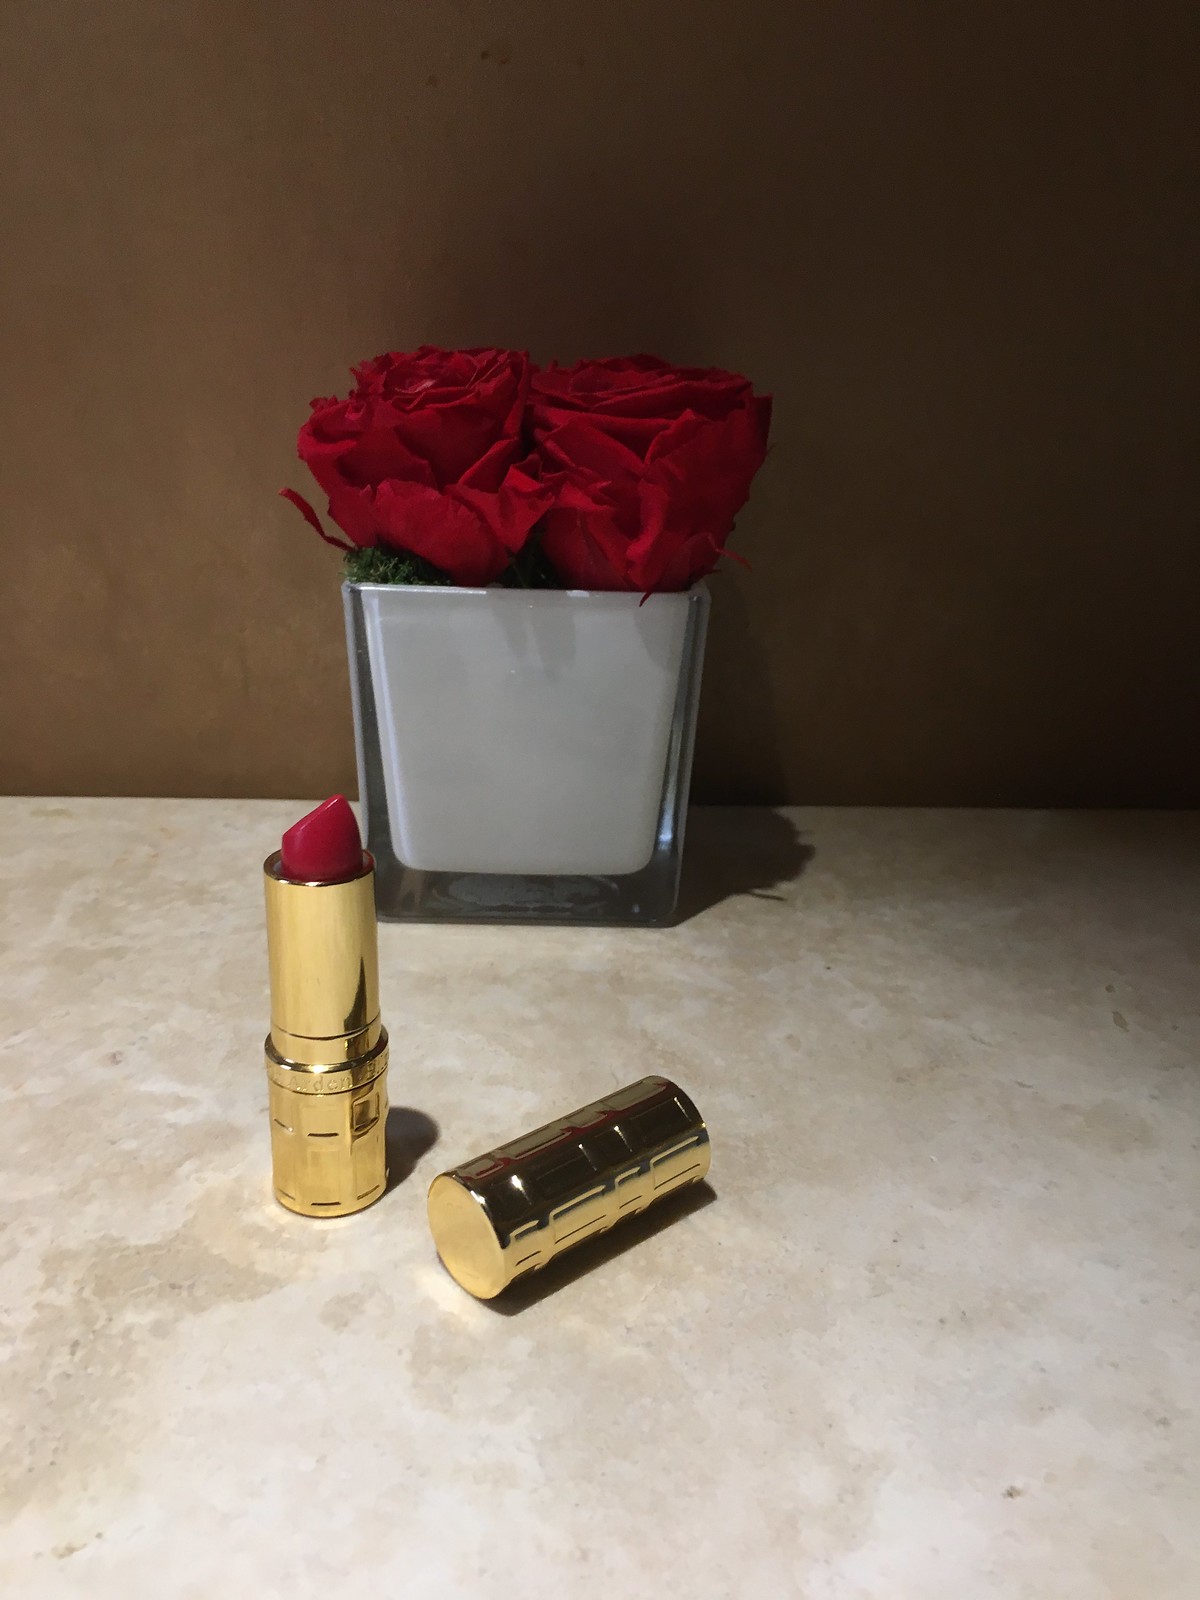 roses and lipstick